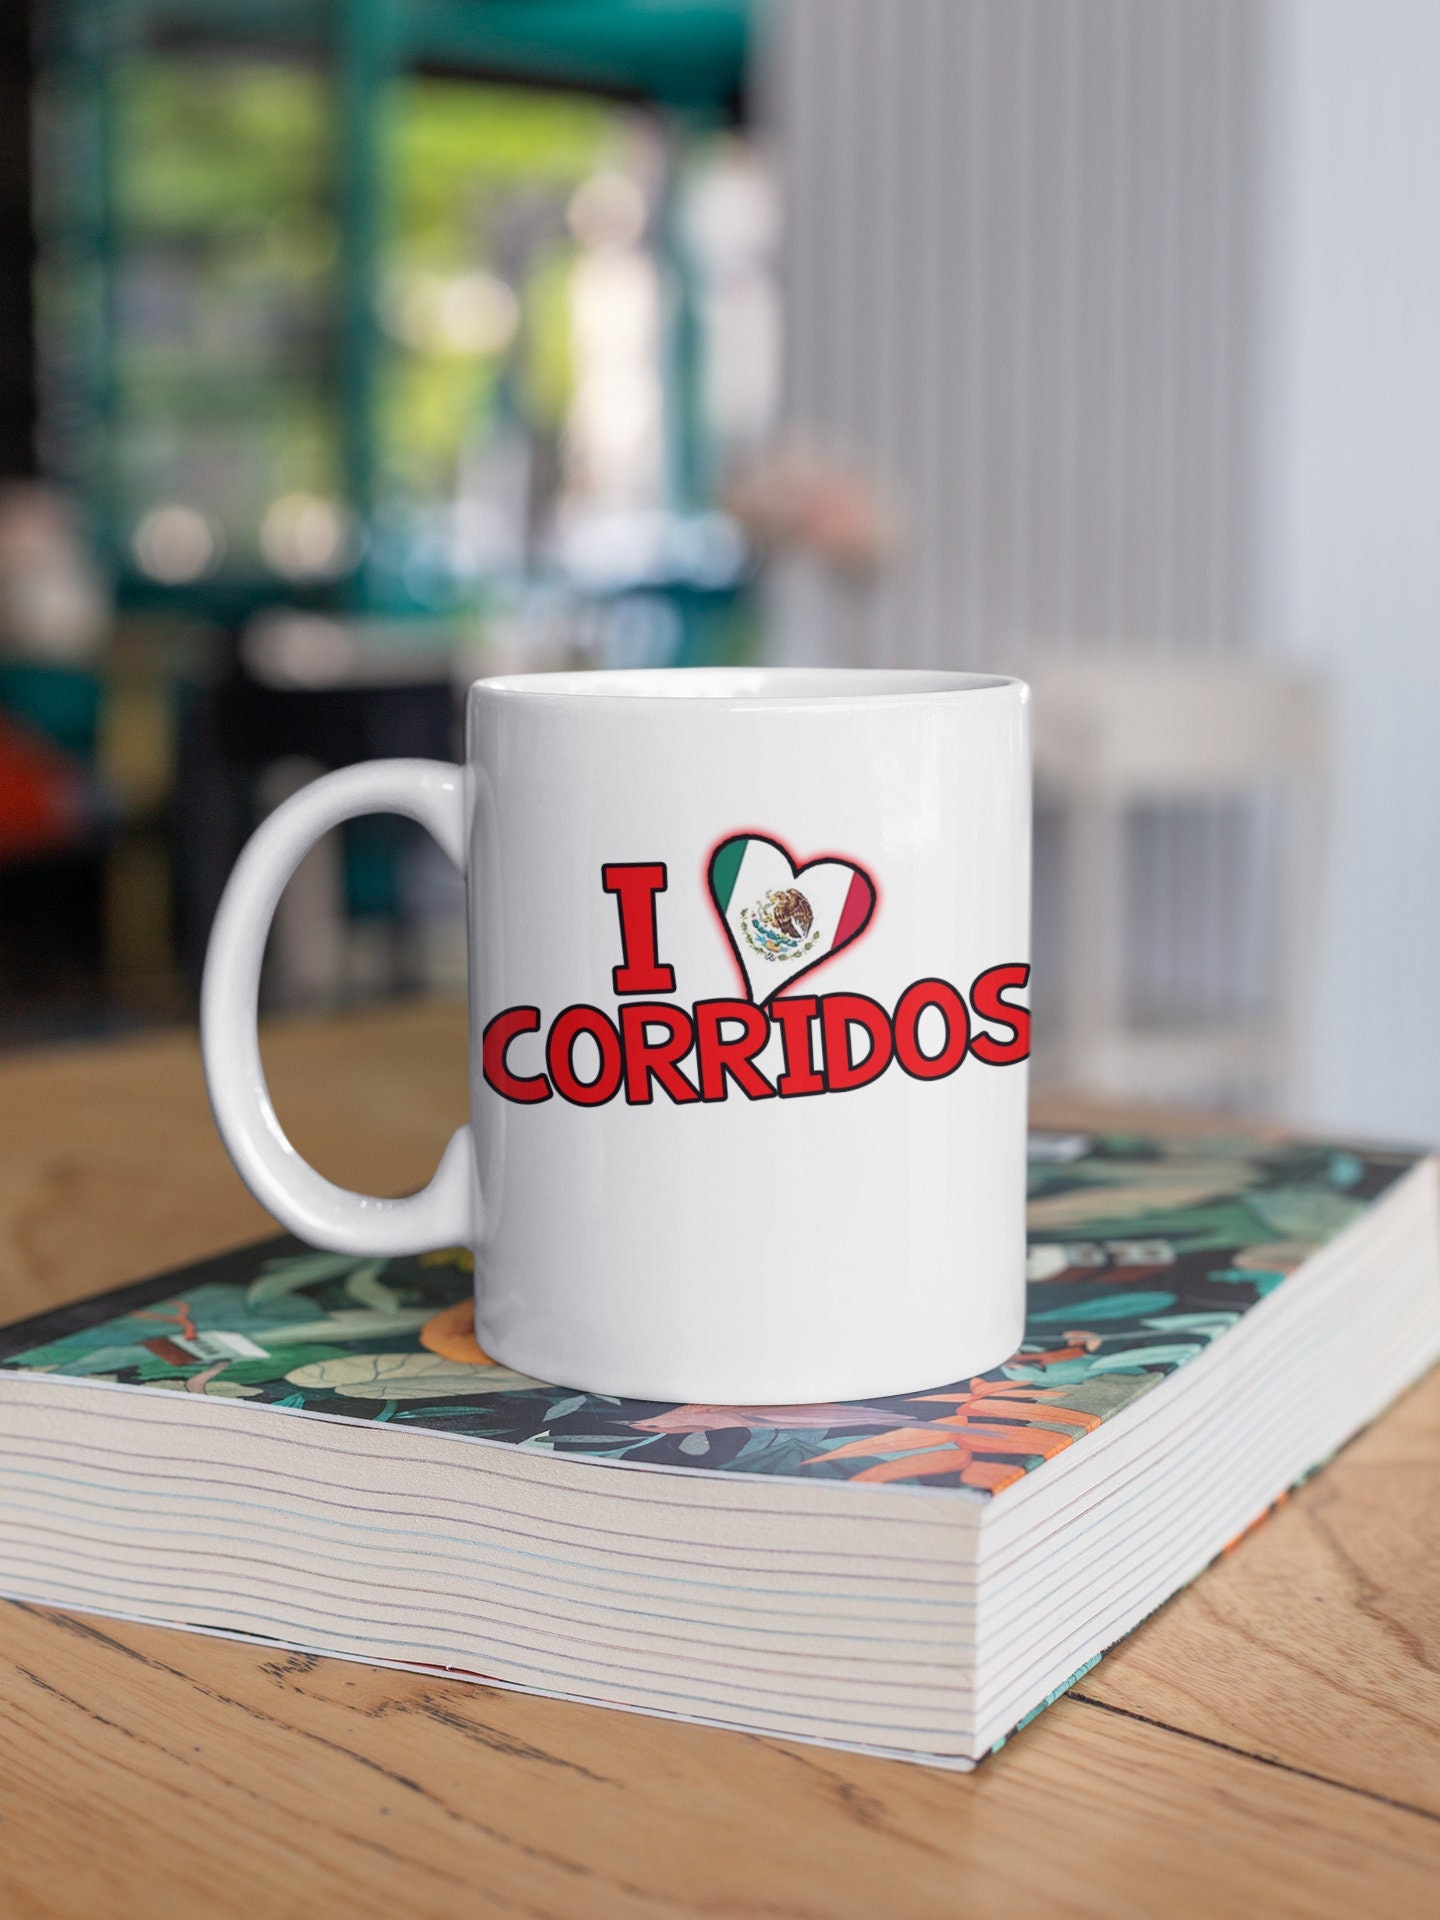  Regalos Chistosos, Spanish Gifts for her, Taza De Cafe Regalo  para Mujer : Handmade Products